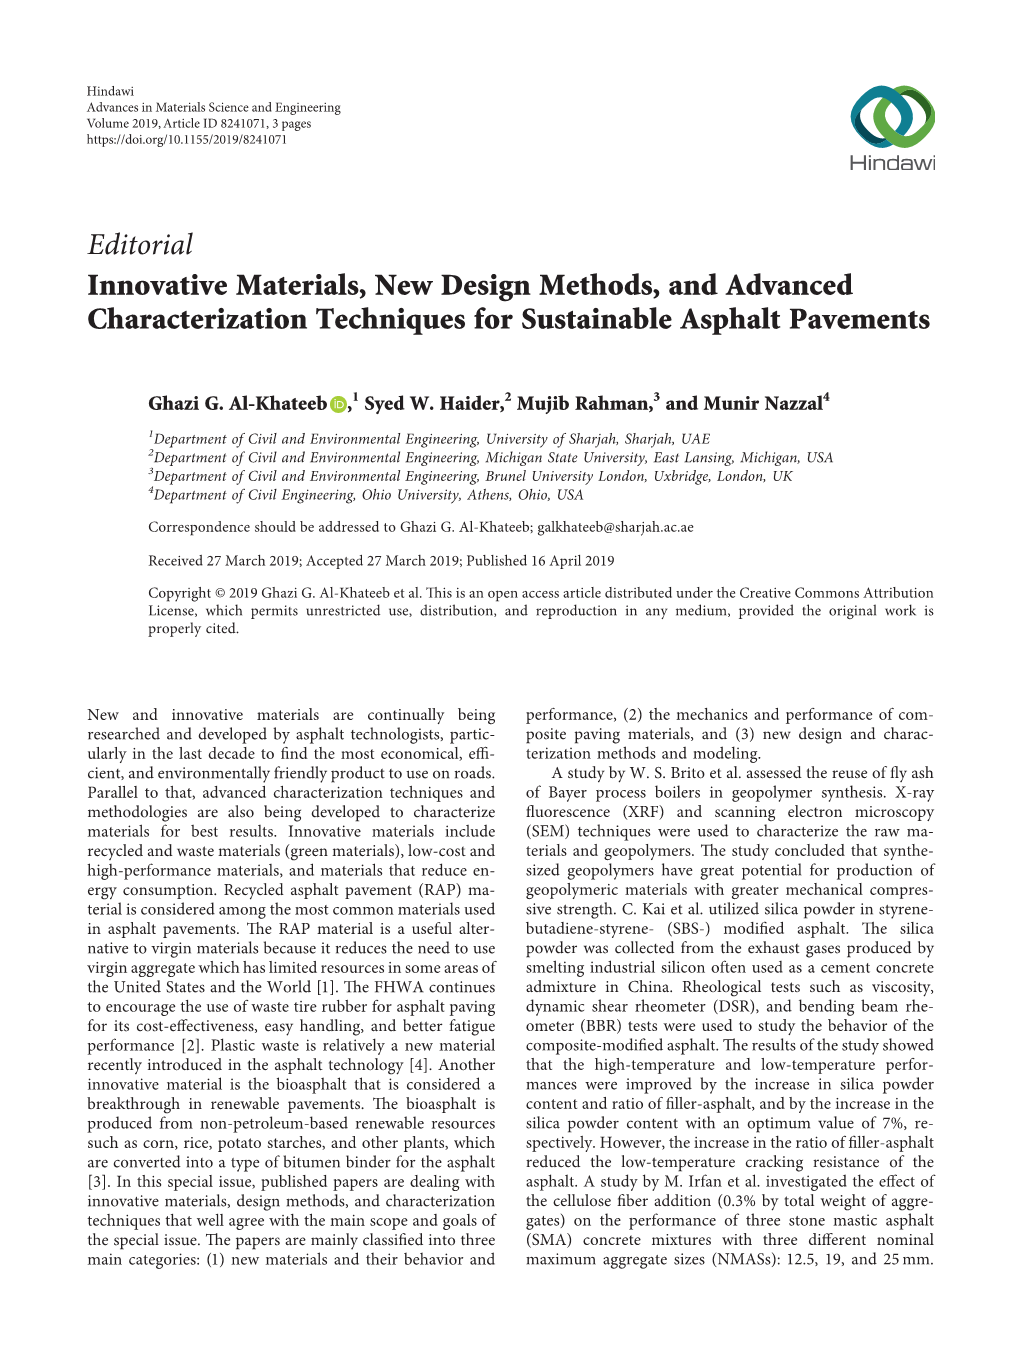 Editorial Innovative Materials, New Design Methods, and Advanced Characterization Techniques for Sustainable Asphalt Pavements